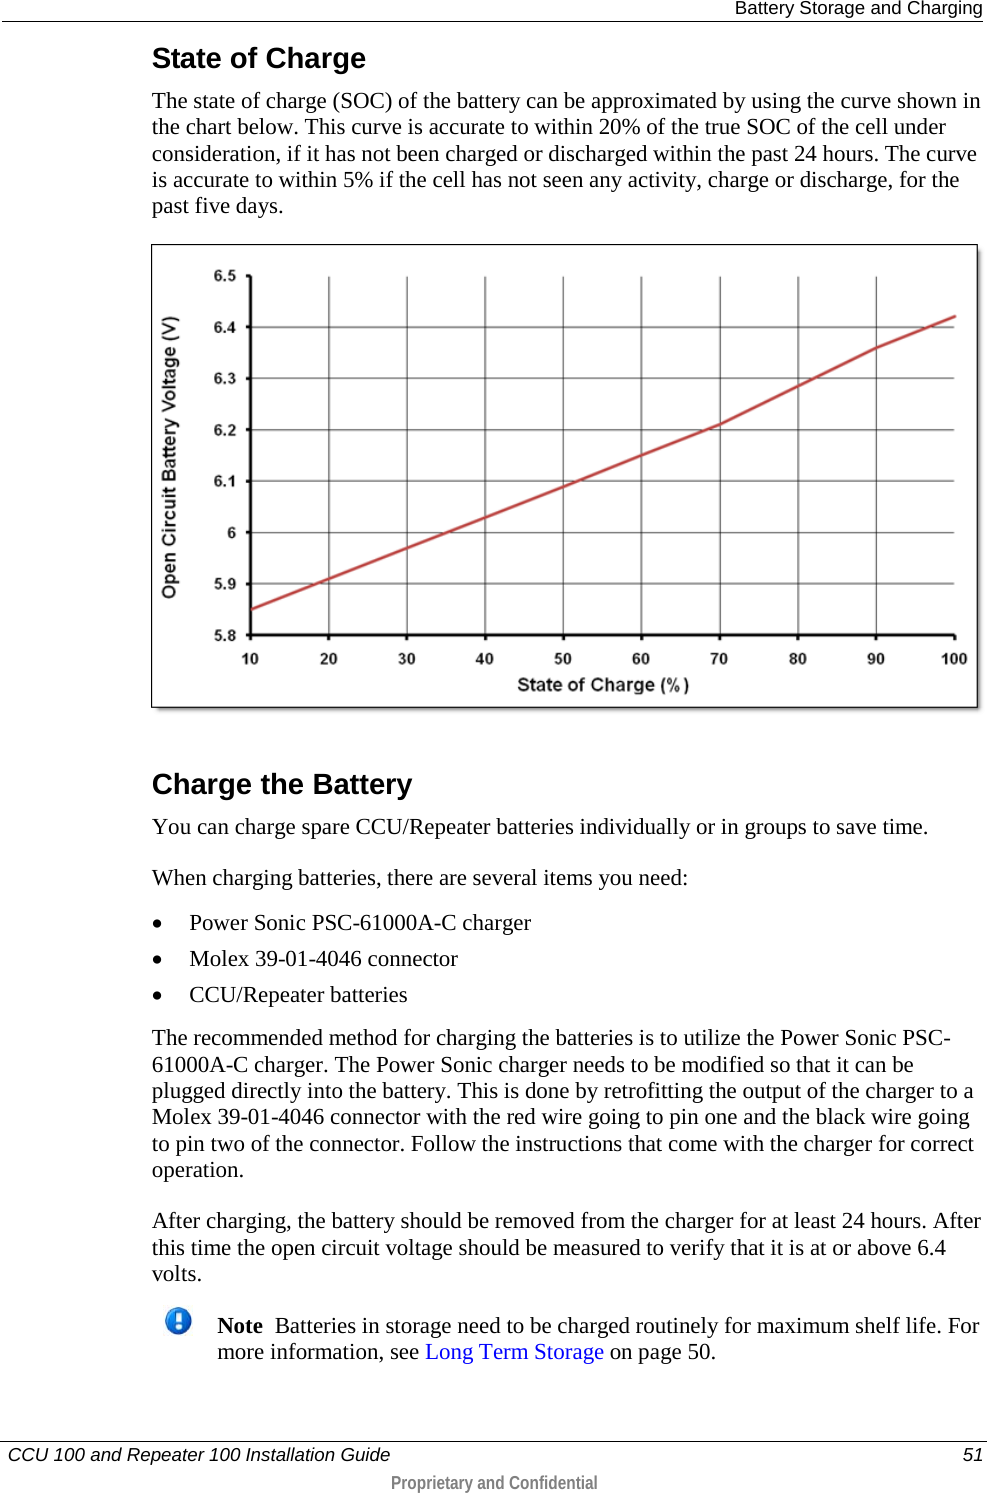  Battery Storage and Charging   CCU 100 and Repeater 100 Installation Guide    51  Proprietary and Confidential  State of Charge The state of charge (SOC) of the battery can be approximated by using the curve shown in the chart below. This curve is accurate to within 20% of the true SOC of the cell under consideration, if it has not been charged or discharged within the past 24 hours. The curve is accurate to within 5% if the cell has not seen any activity, charge or discharge, for the past five days.   Charge the Battery You can charge spare CCU/Repeater batteries individually or in groups to save time.  When charging batteries, there are several items you need:  • Power Sonic PSC-61000A-C charger • Molex 39-01-4046 connector • CCU/Repeater batteries The recommended method for charging the batteries is to utilize the Power Sonic PSC-61000A-C charger. The Power Sonic charger needs to be modified so that it can be plugged directly into the battery. This is done by retrofitting the output of the charger to a Molex 39-01-4046 connector with the red wire going to pin one and the black wire going to pin two of the connector. Follow the instructions that come with the charger for correct operation. After charging, the battery should be removed from the charger for at least 24 hours. After this time the open circuit voltage should be measured to verify that it is at or above 6.4 volts.   Note  Batteries in storage need to be charged routinely for maximum shelf life. For more information, see Long Term Storage on page 50.    